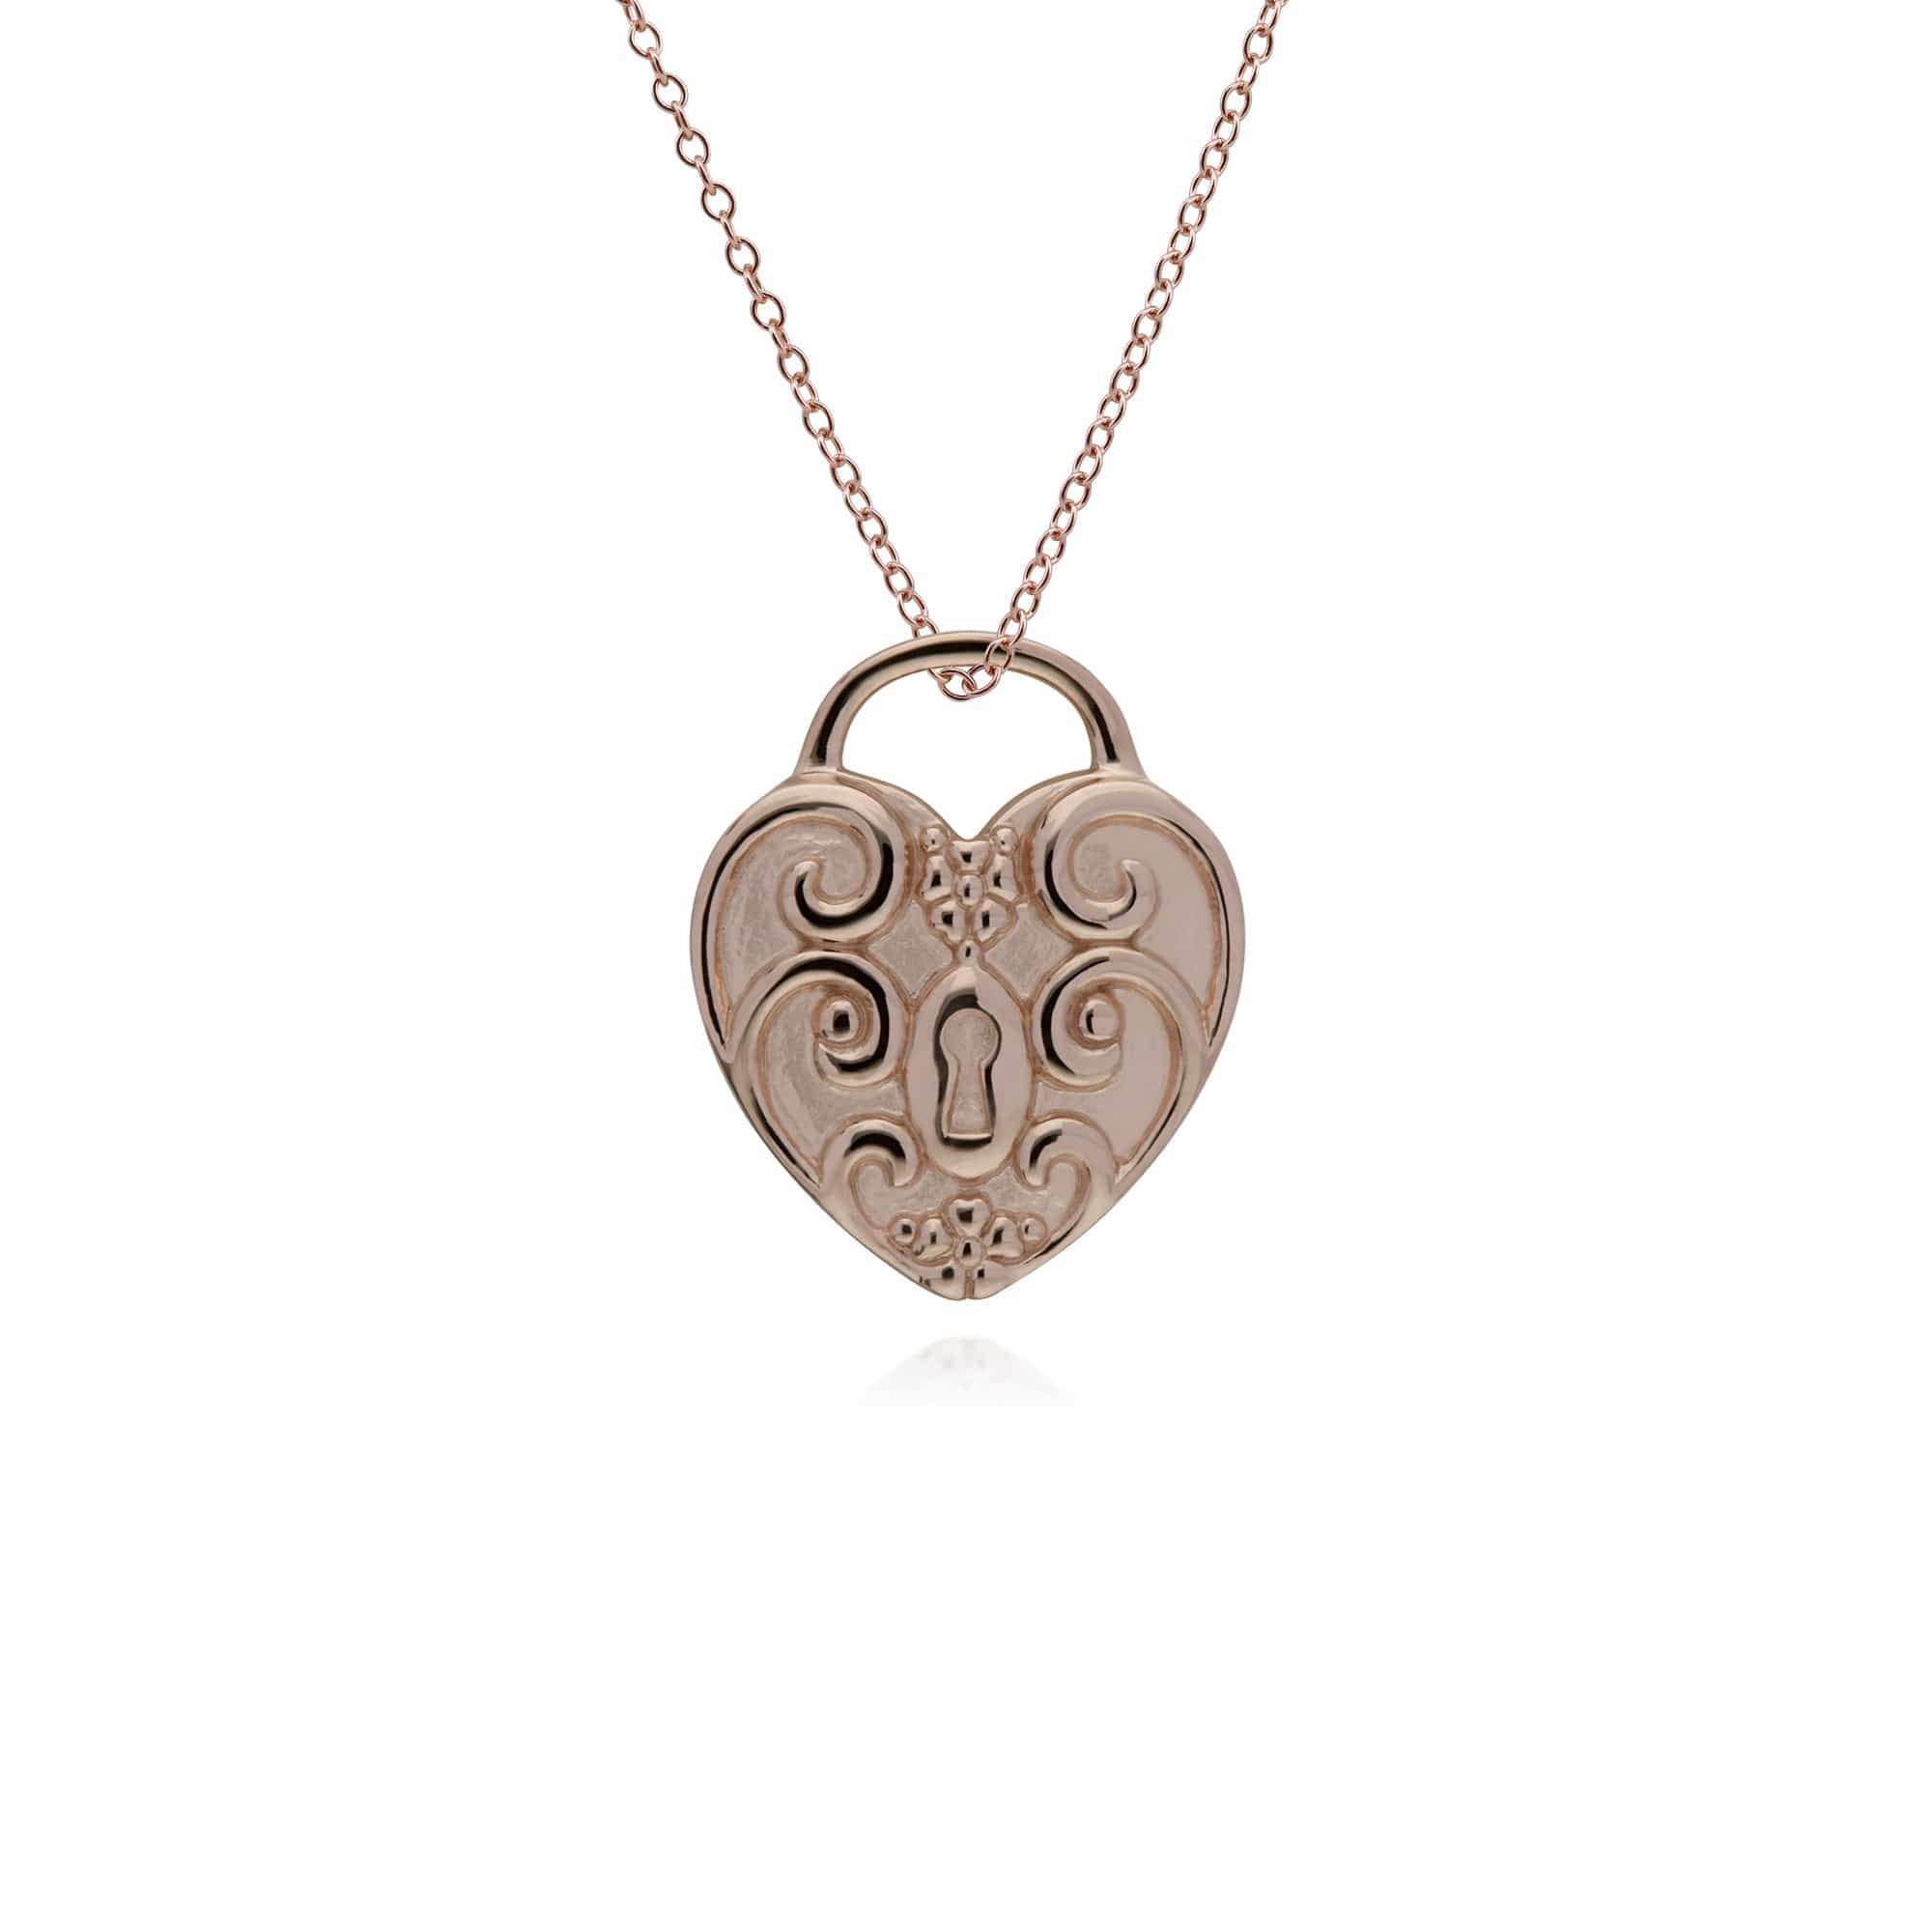 270P026702925-270P026901925 Classic Heart Lock Pendant & Opal Big Key Charm in Rose Gold Plated 925 Sterling Silver 3